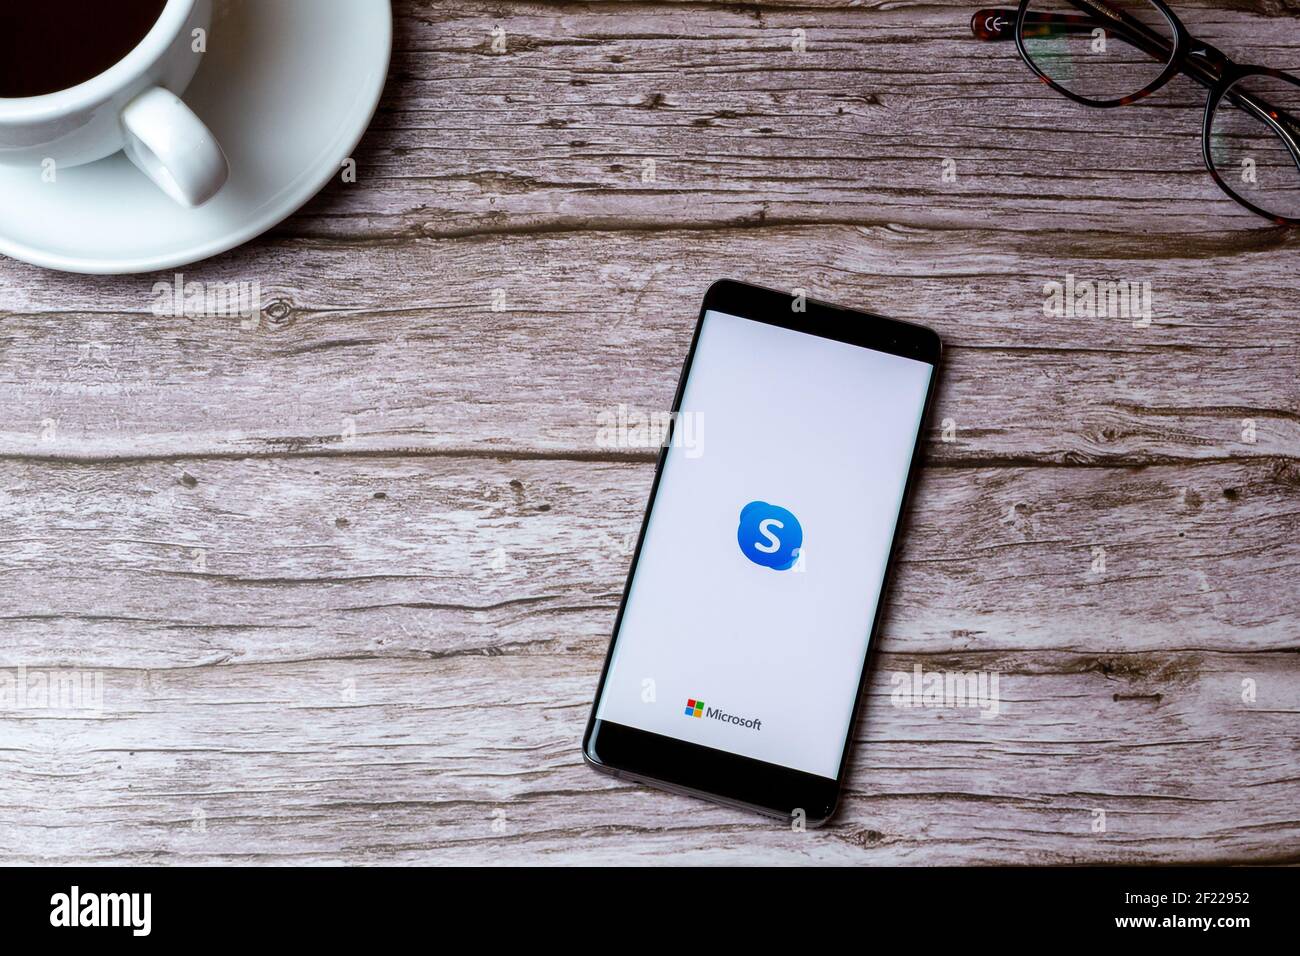 A mobile phone or cell phone laid on a wooden table or desk with the Skype app open Stock Photo